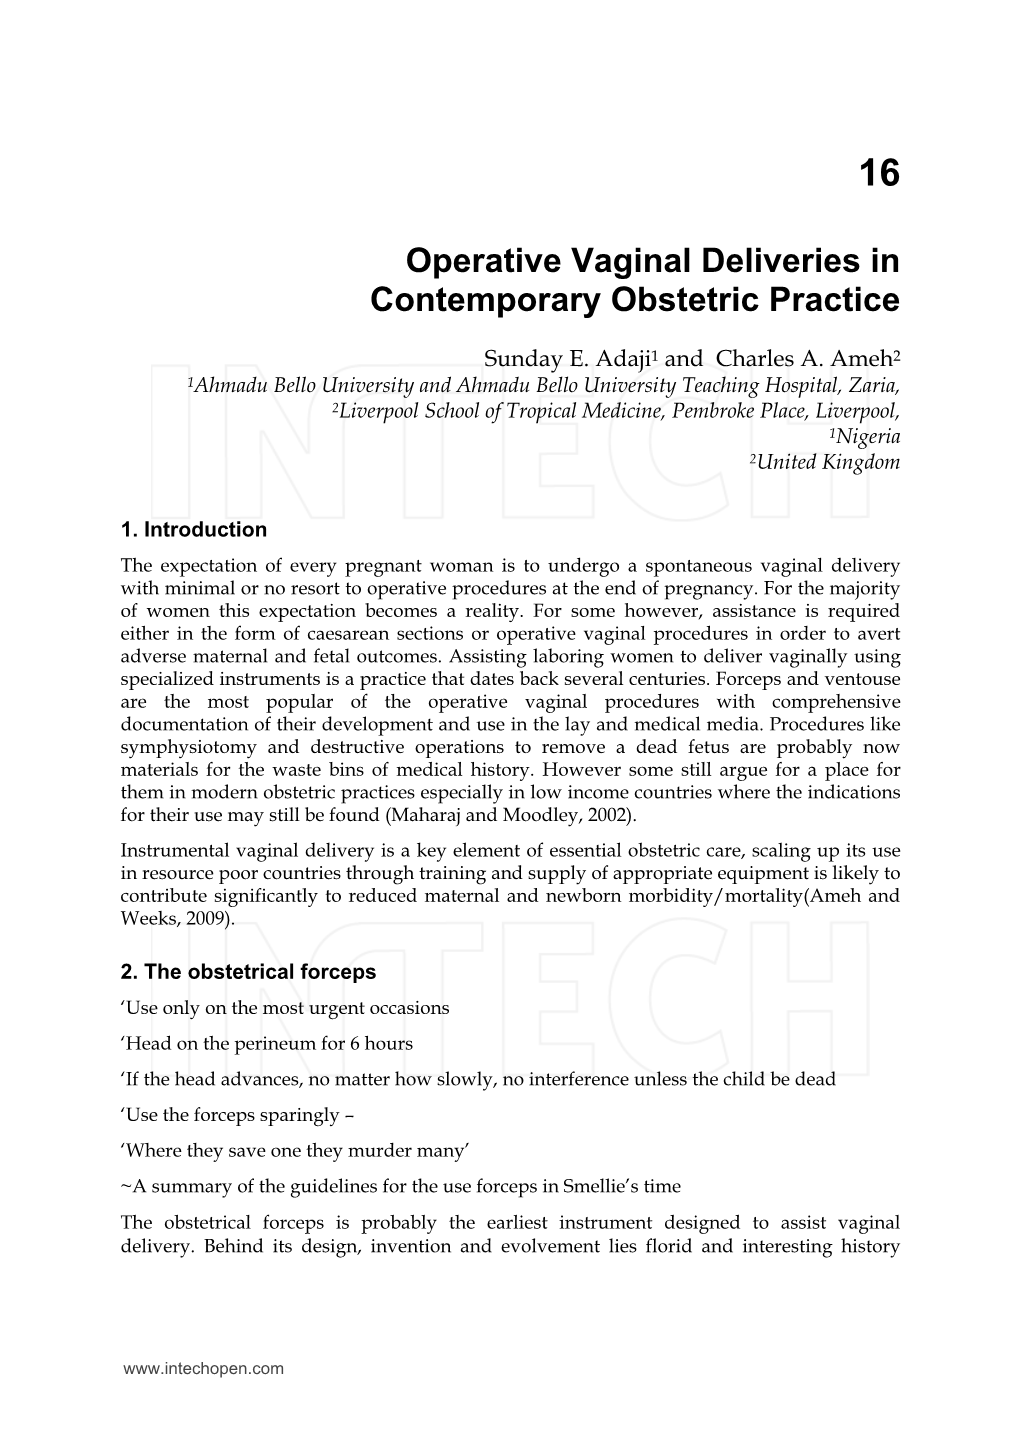 Operative Vaginal Deliveries in Contemporary Obstetric Practice